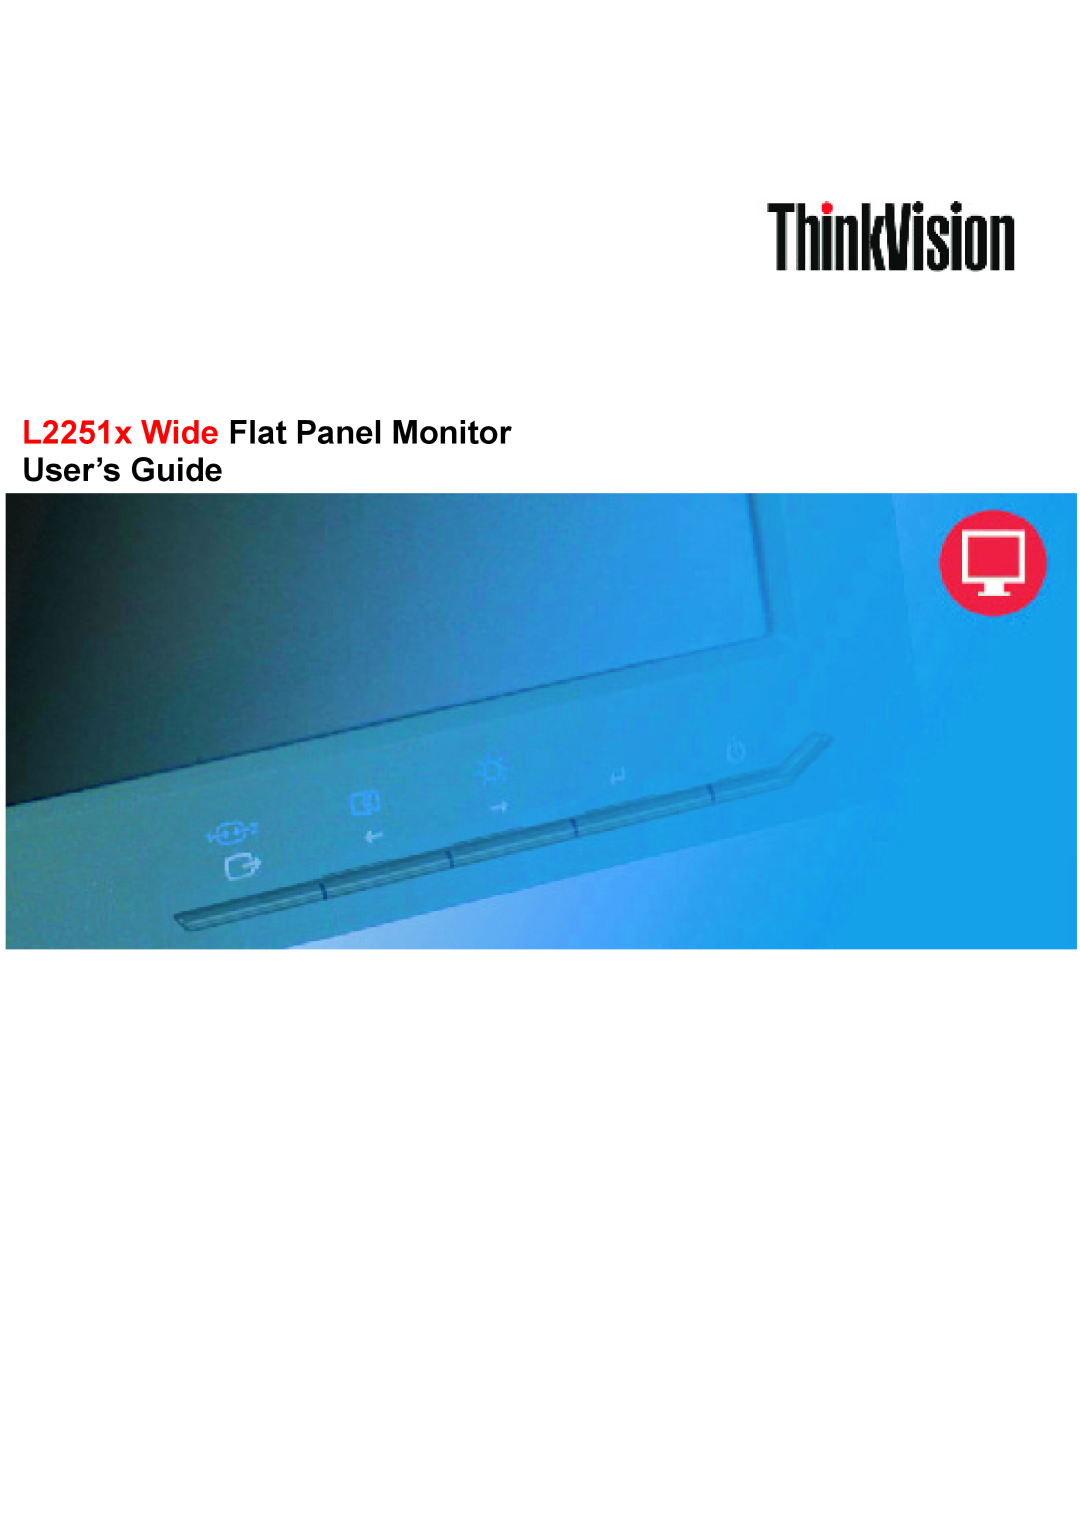 Lenovo 2578HB6 manual L2251x Wide Flat Panel Monitor User’s Guide 